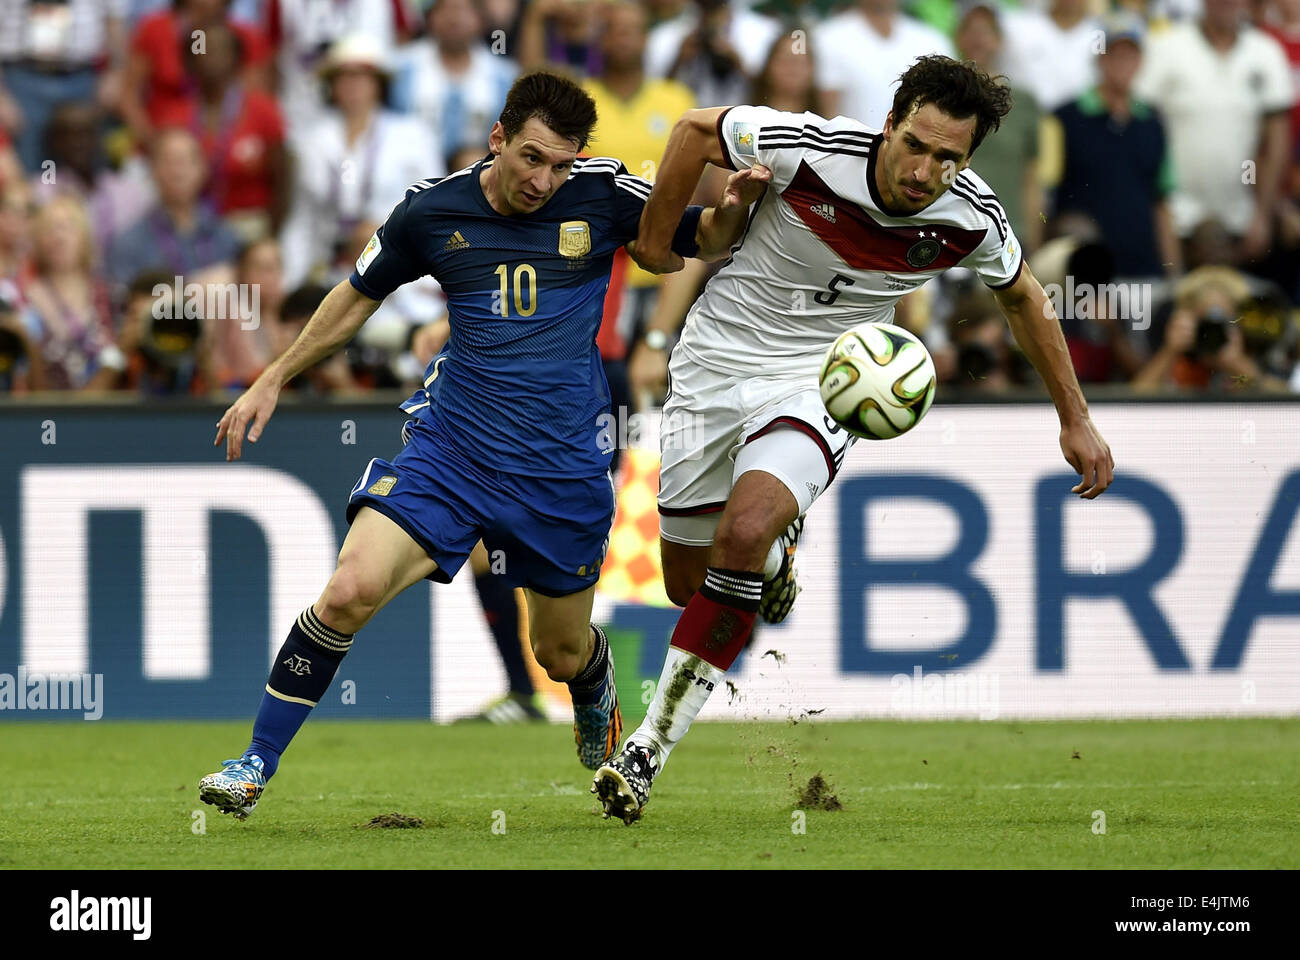 Rio De Janeiro, Brazil. 13th July, 2014. Germany's Mats Hummels (R) vies with Argentina's Lionel Messi during the final match between Germany and Argentina of 2014 FIFA World Cup at the Estadio do Maracana Stadium in Rio de Janeiro, Brazil, on July 13, 2014. Credit:  Qi Heng/Xinhua/Alamy Live News Stock Photo